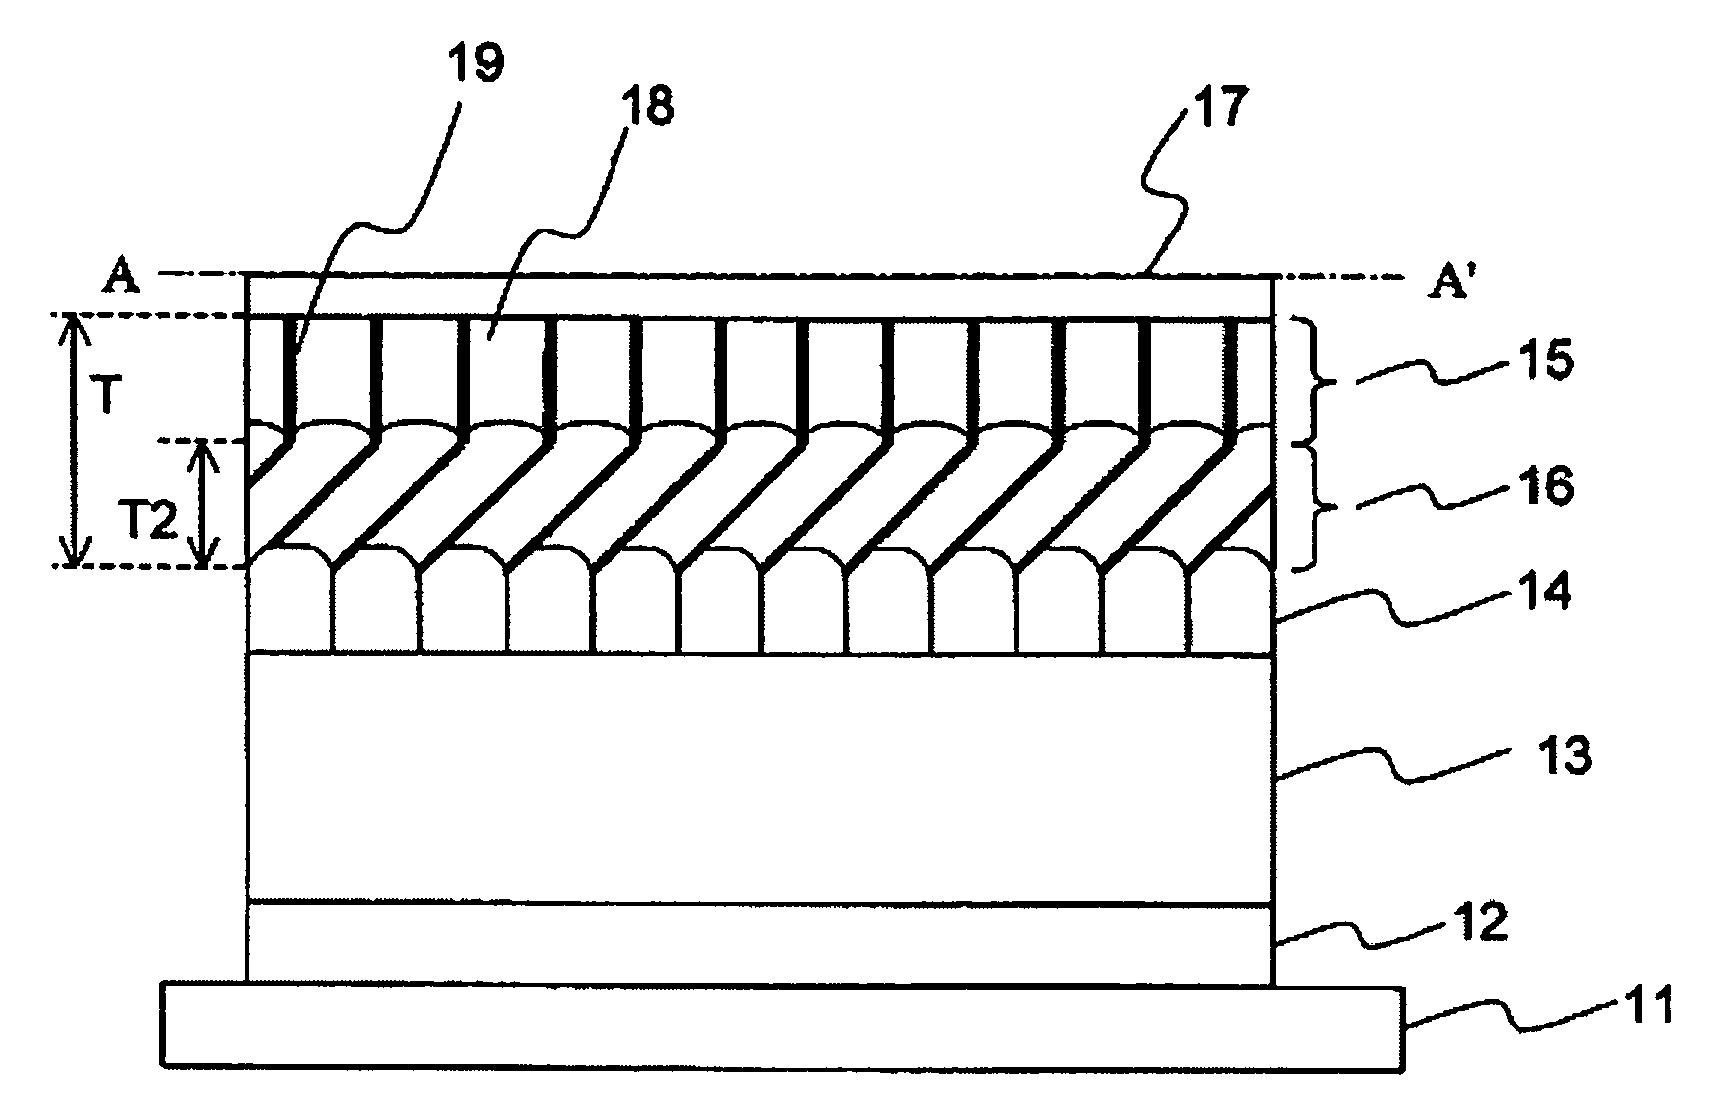 Magnetic recording medium containing first and second recording layers, each layer containing a columnar structure